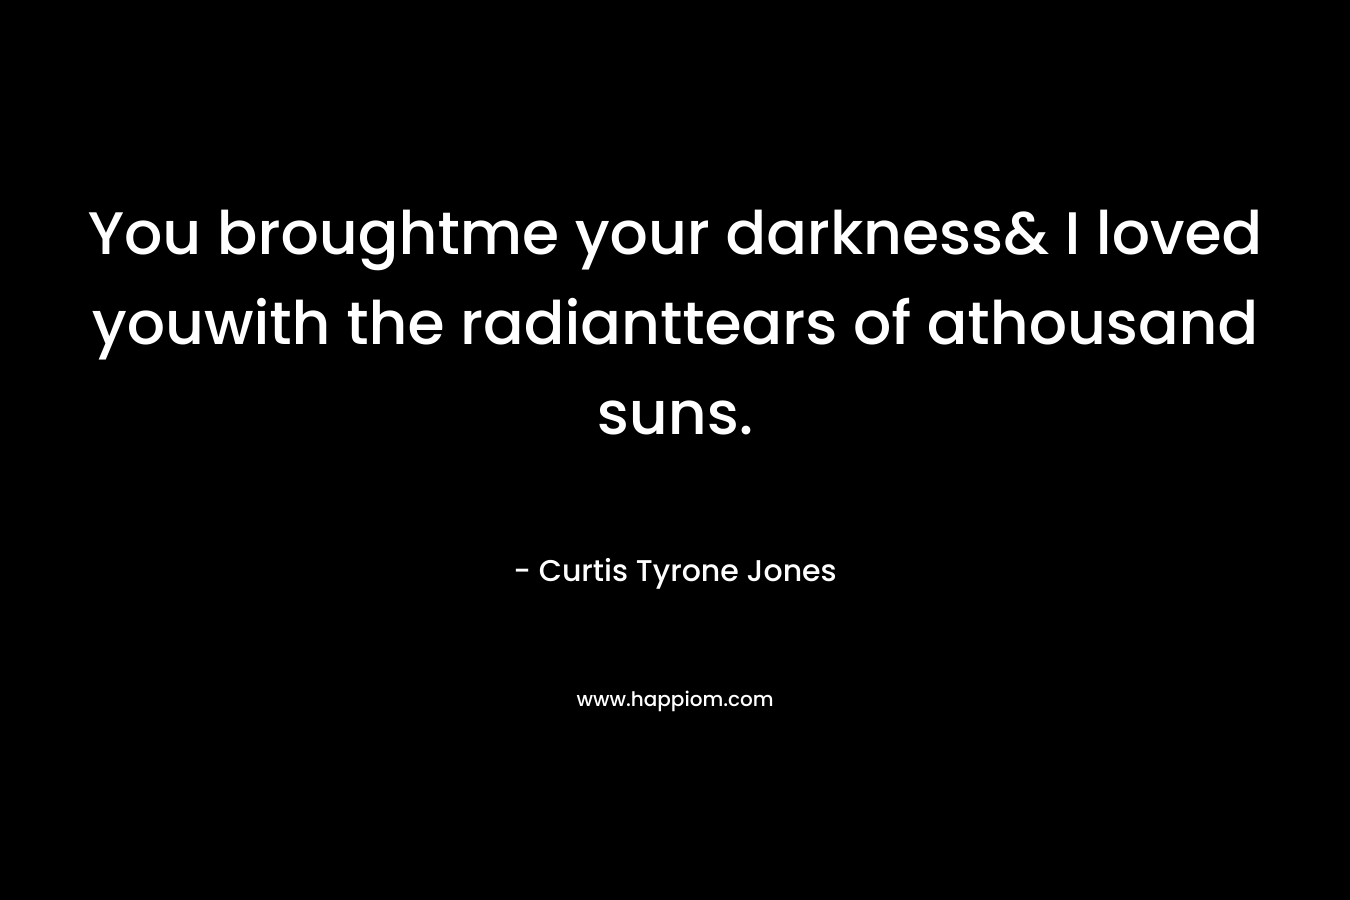 You broughtme your darkness& I loved youwith the radianttears of athousand suns.